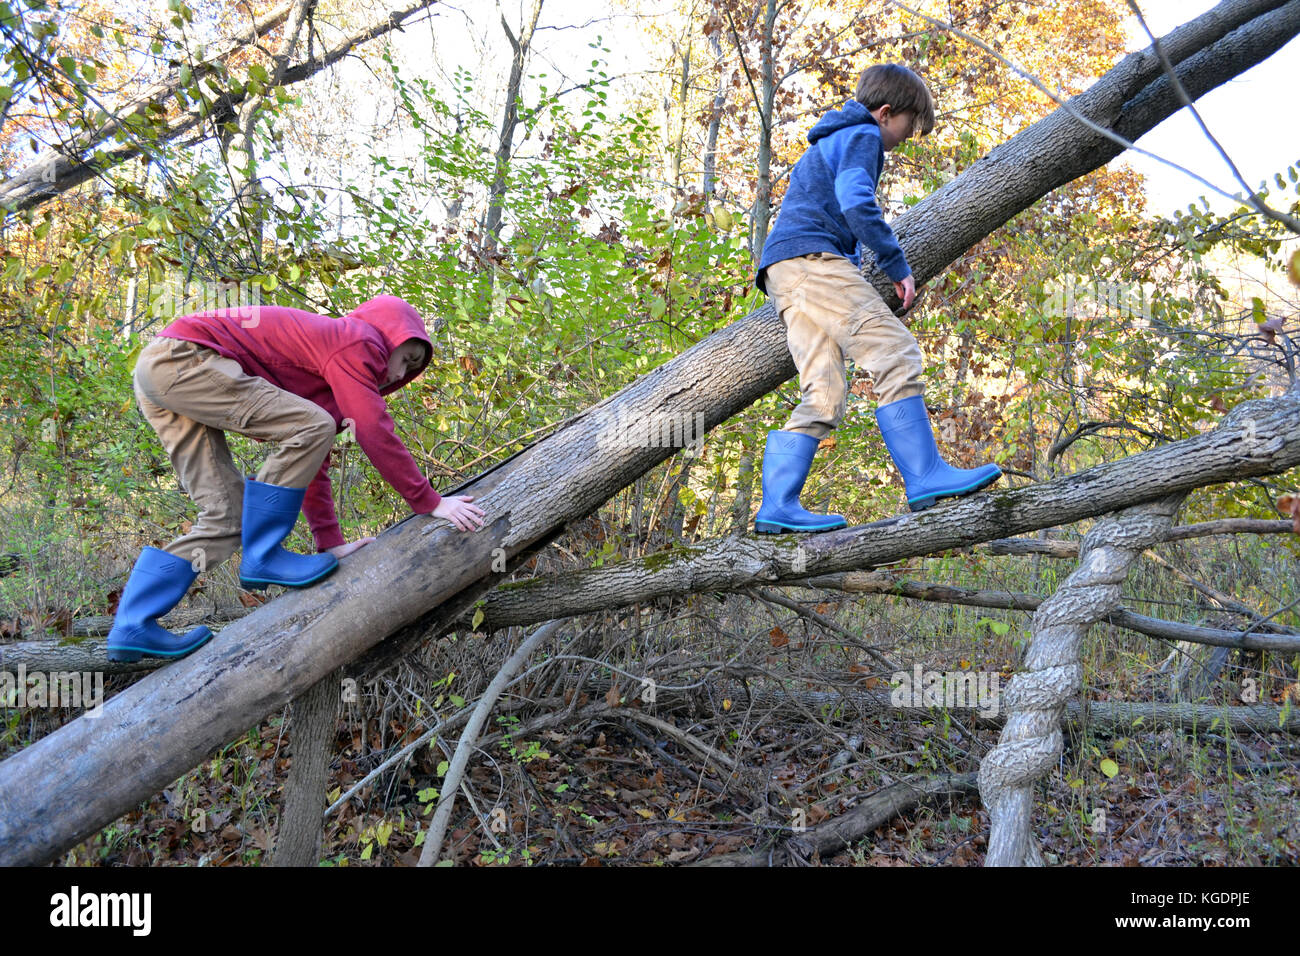 Two young boys climbing trees Stock Photo